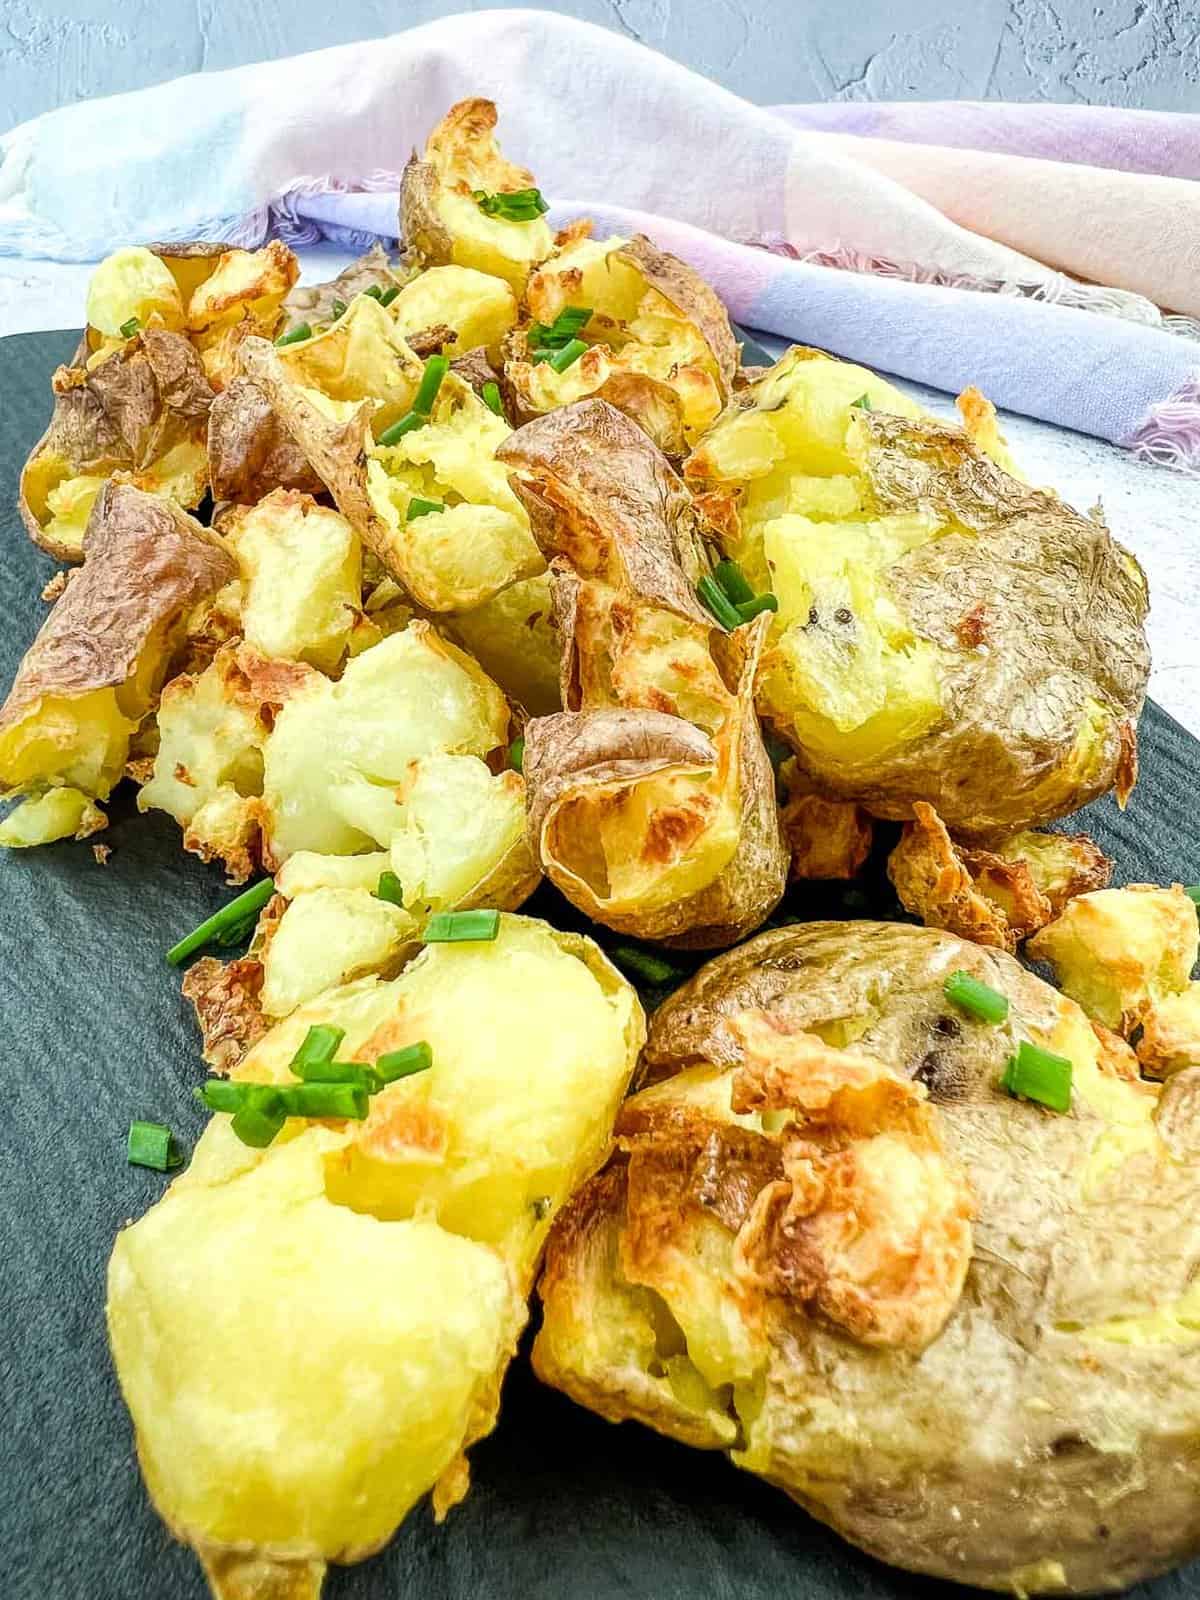 Ninja Woodfire Grill Air Fryer Smashed Potatoes - Grill What You Love